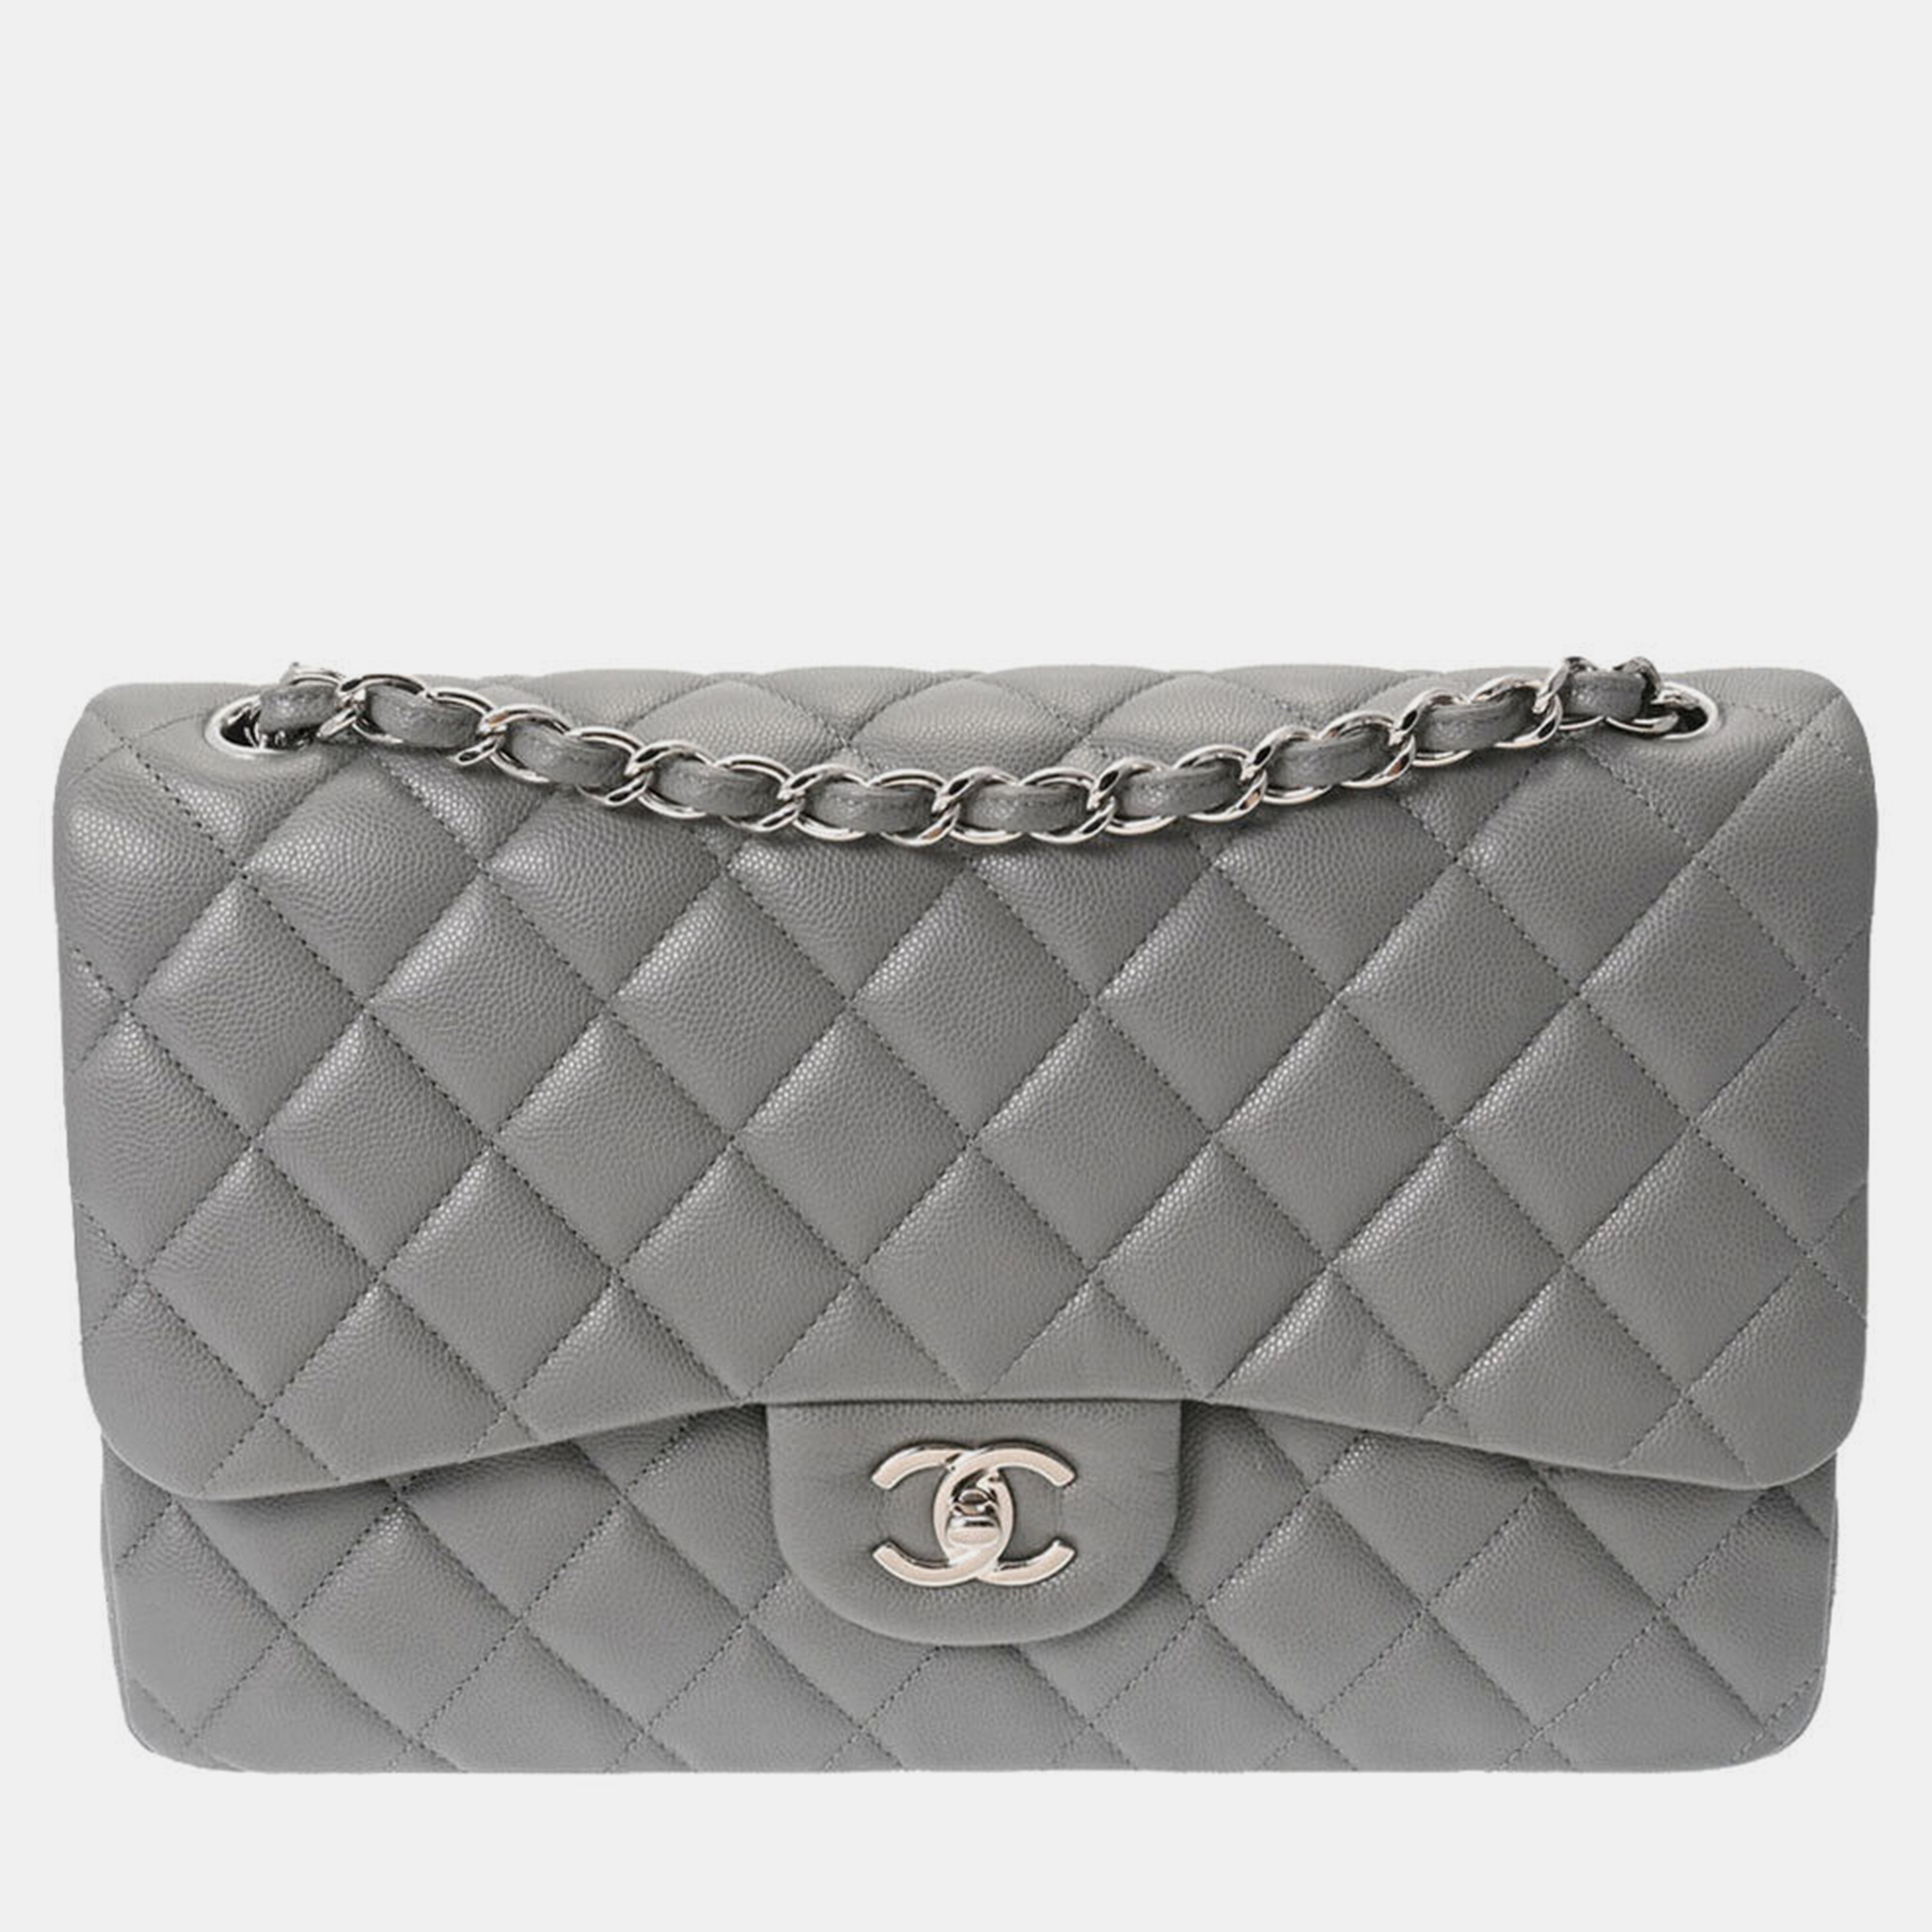 Chanel grey leather classic double flap bag